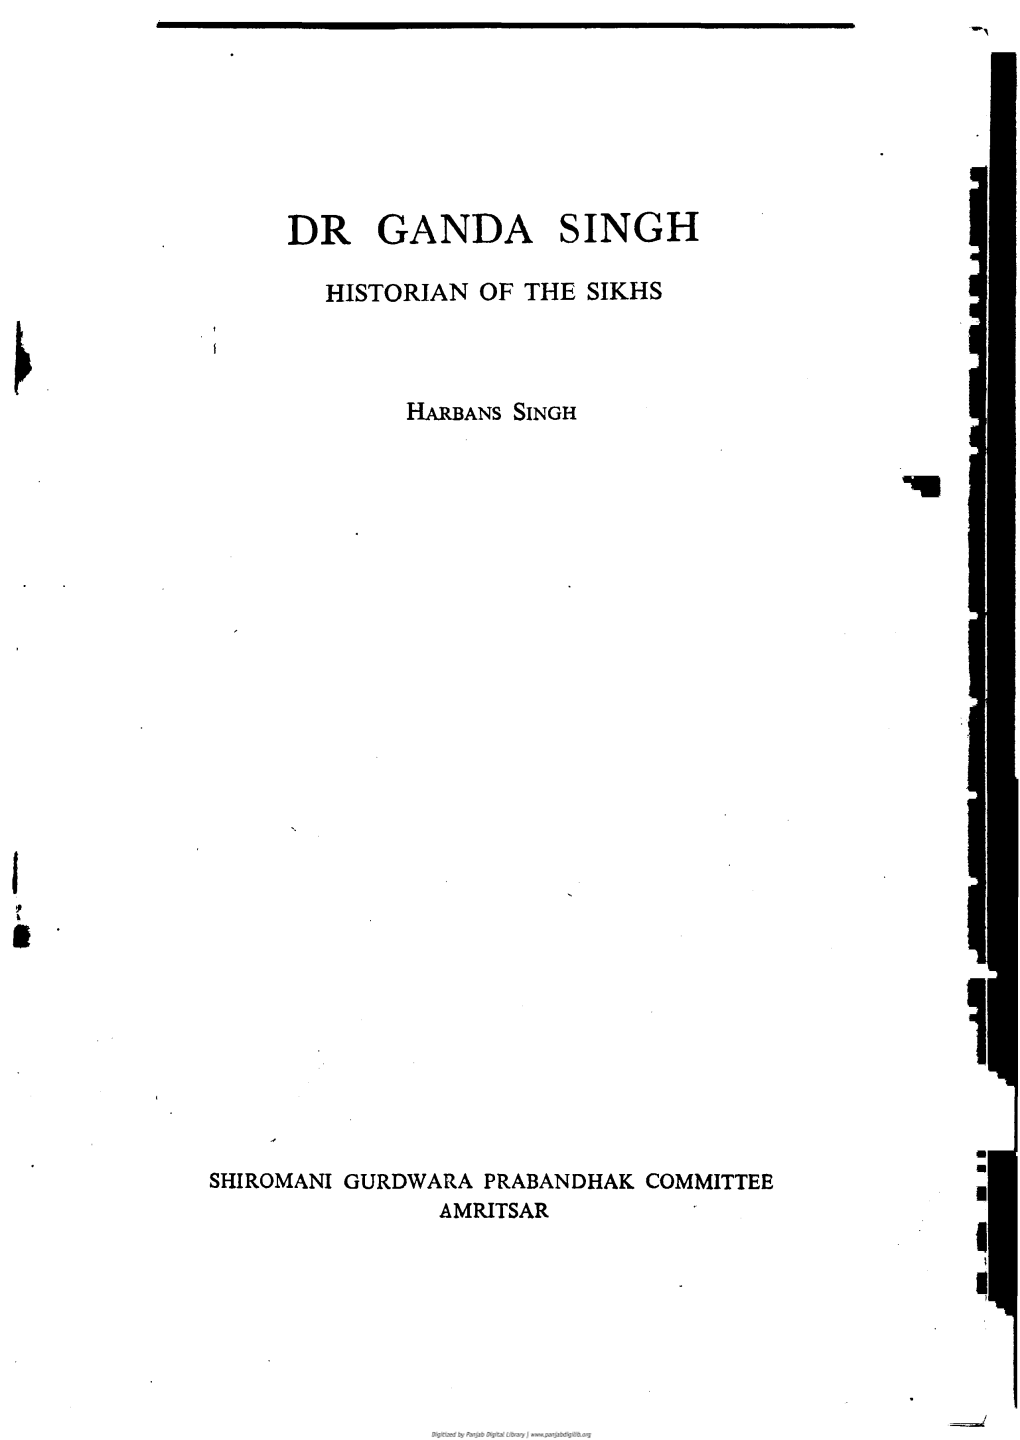 Historian of the Sikhs